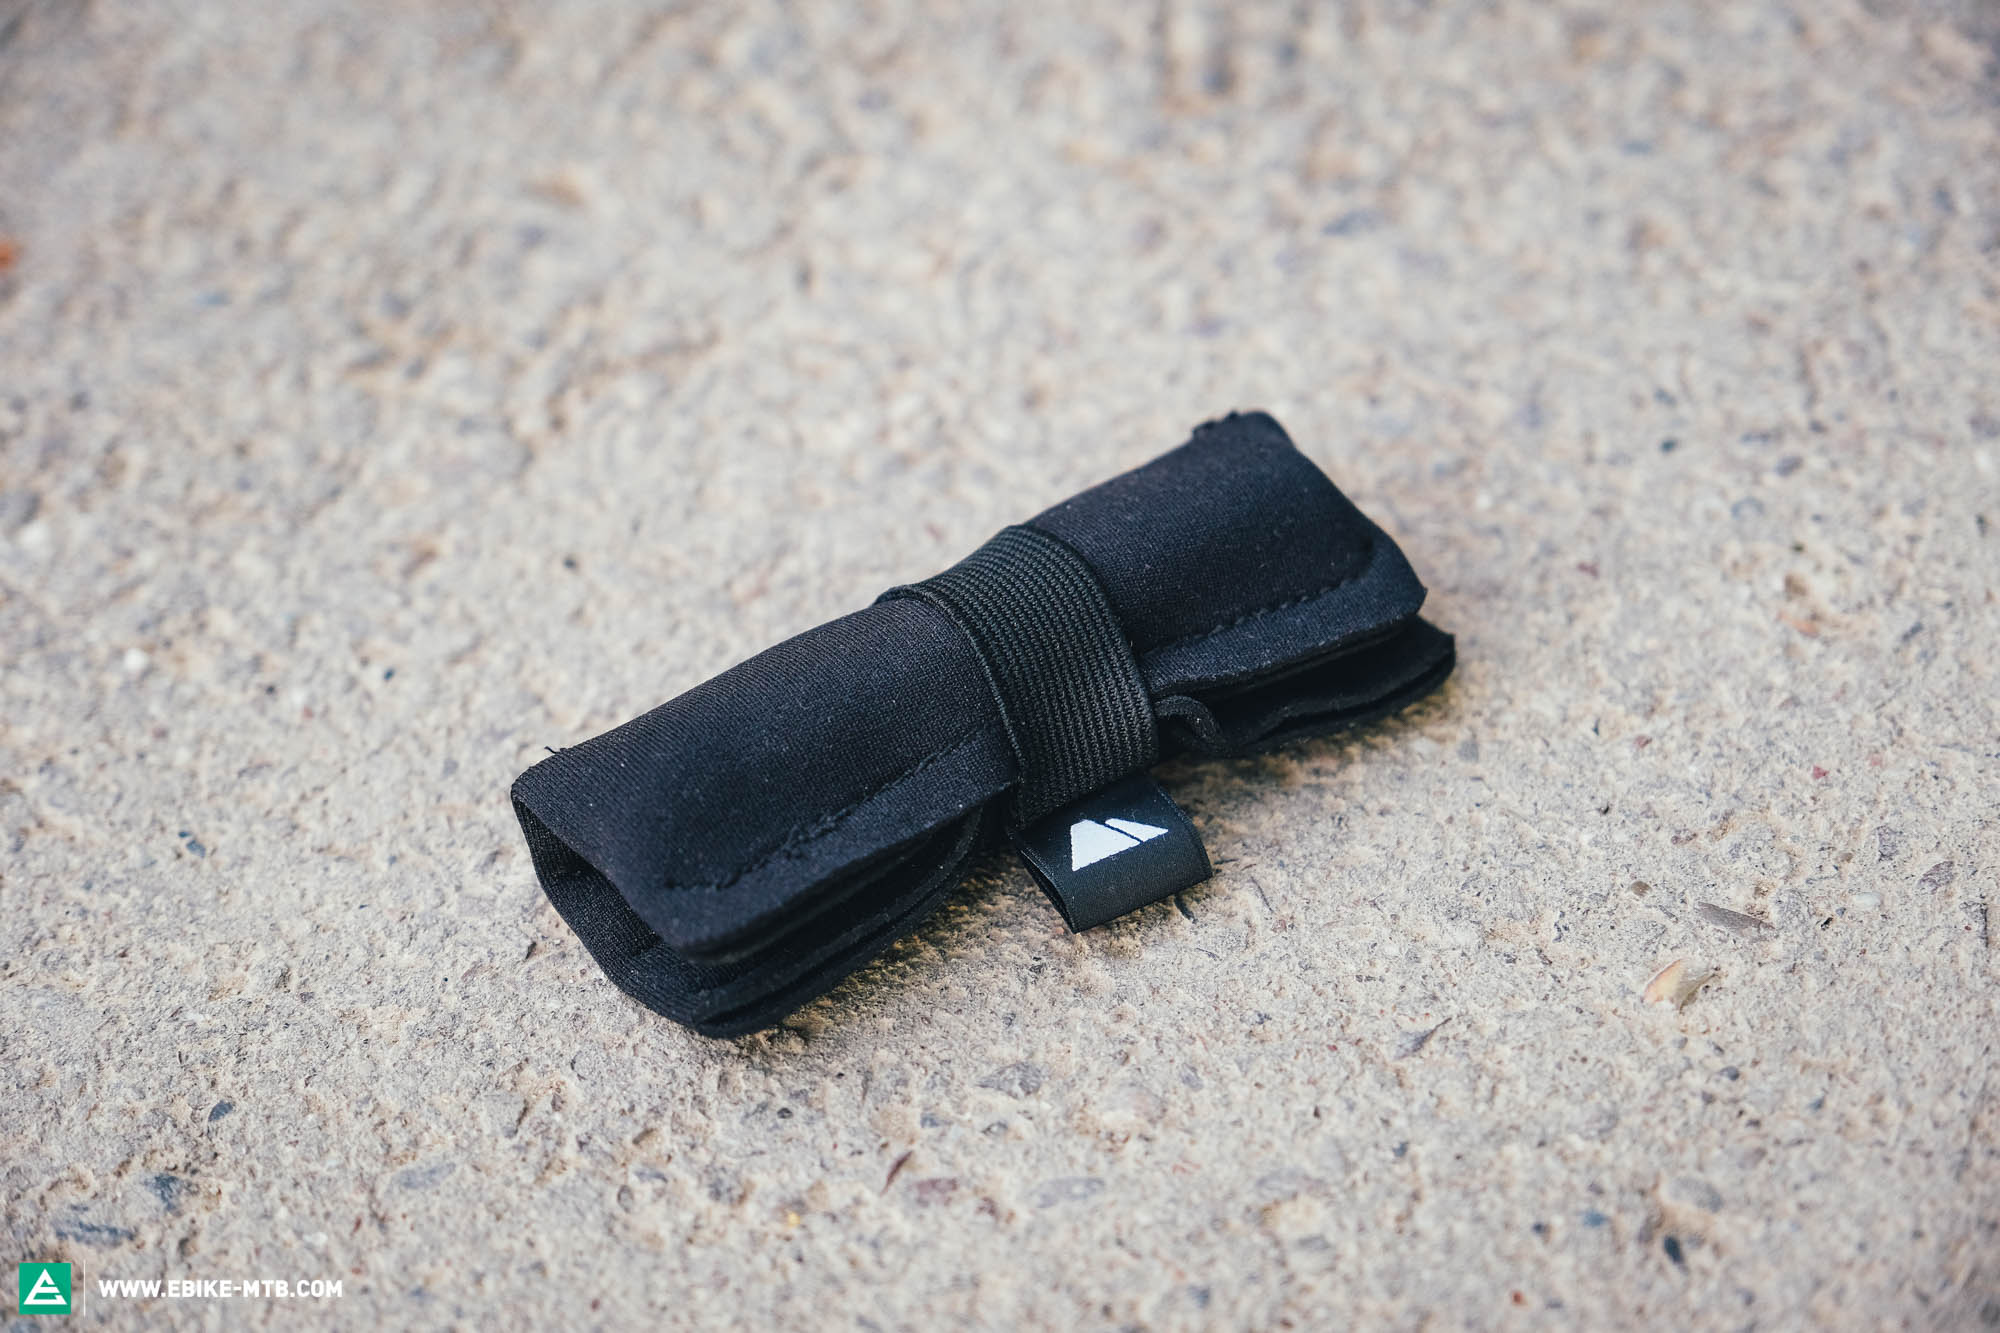 Canyon FIX 3-in-1-Multitool - The all-rounder in a neoprene suit | E ...